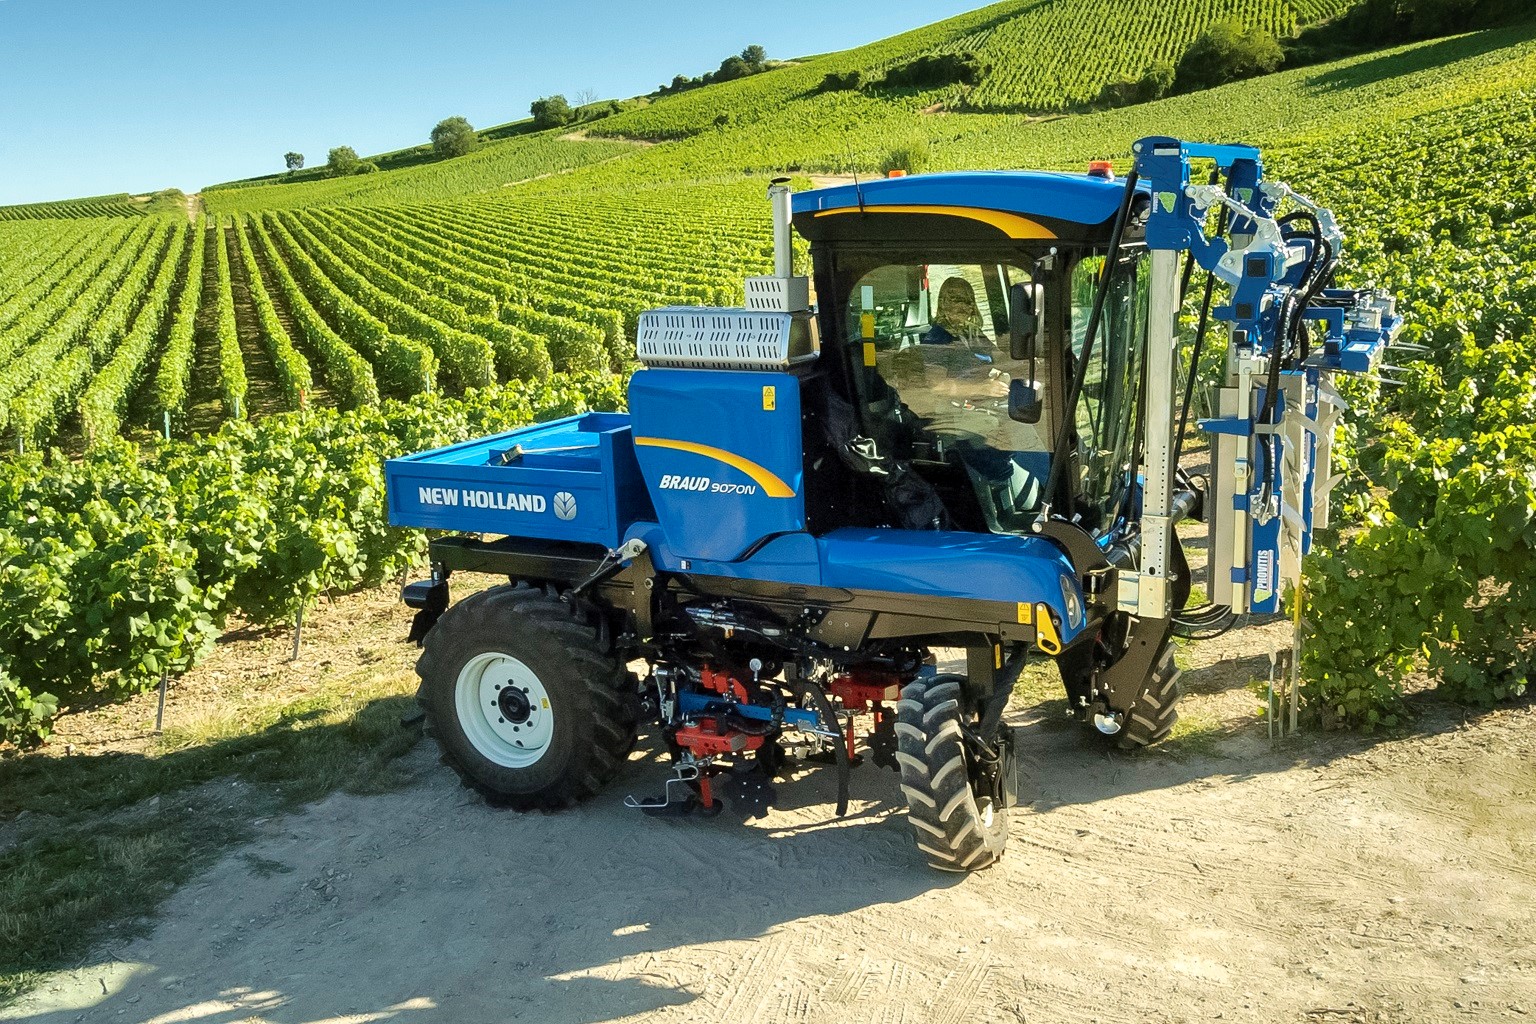 The New Holland Grape Harvester that triumphed at this year’s SITEVI Innovation Awards